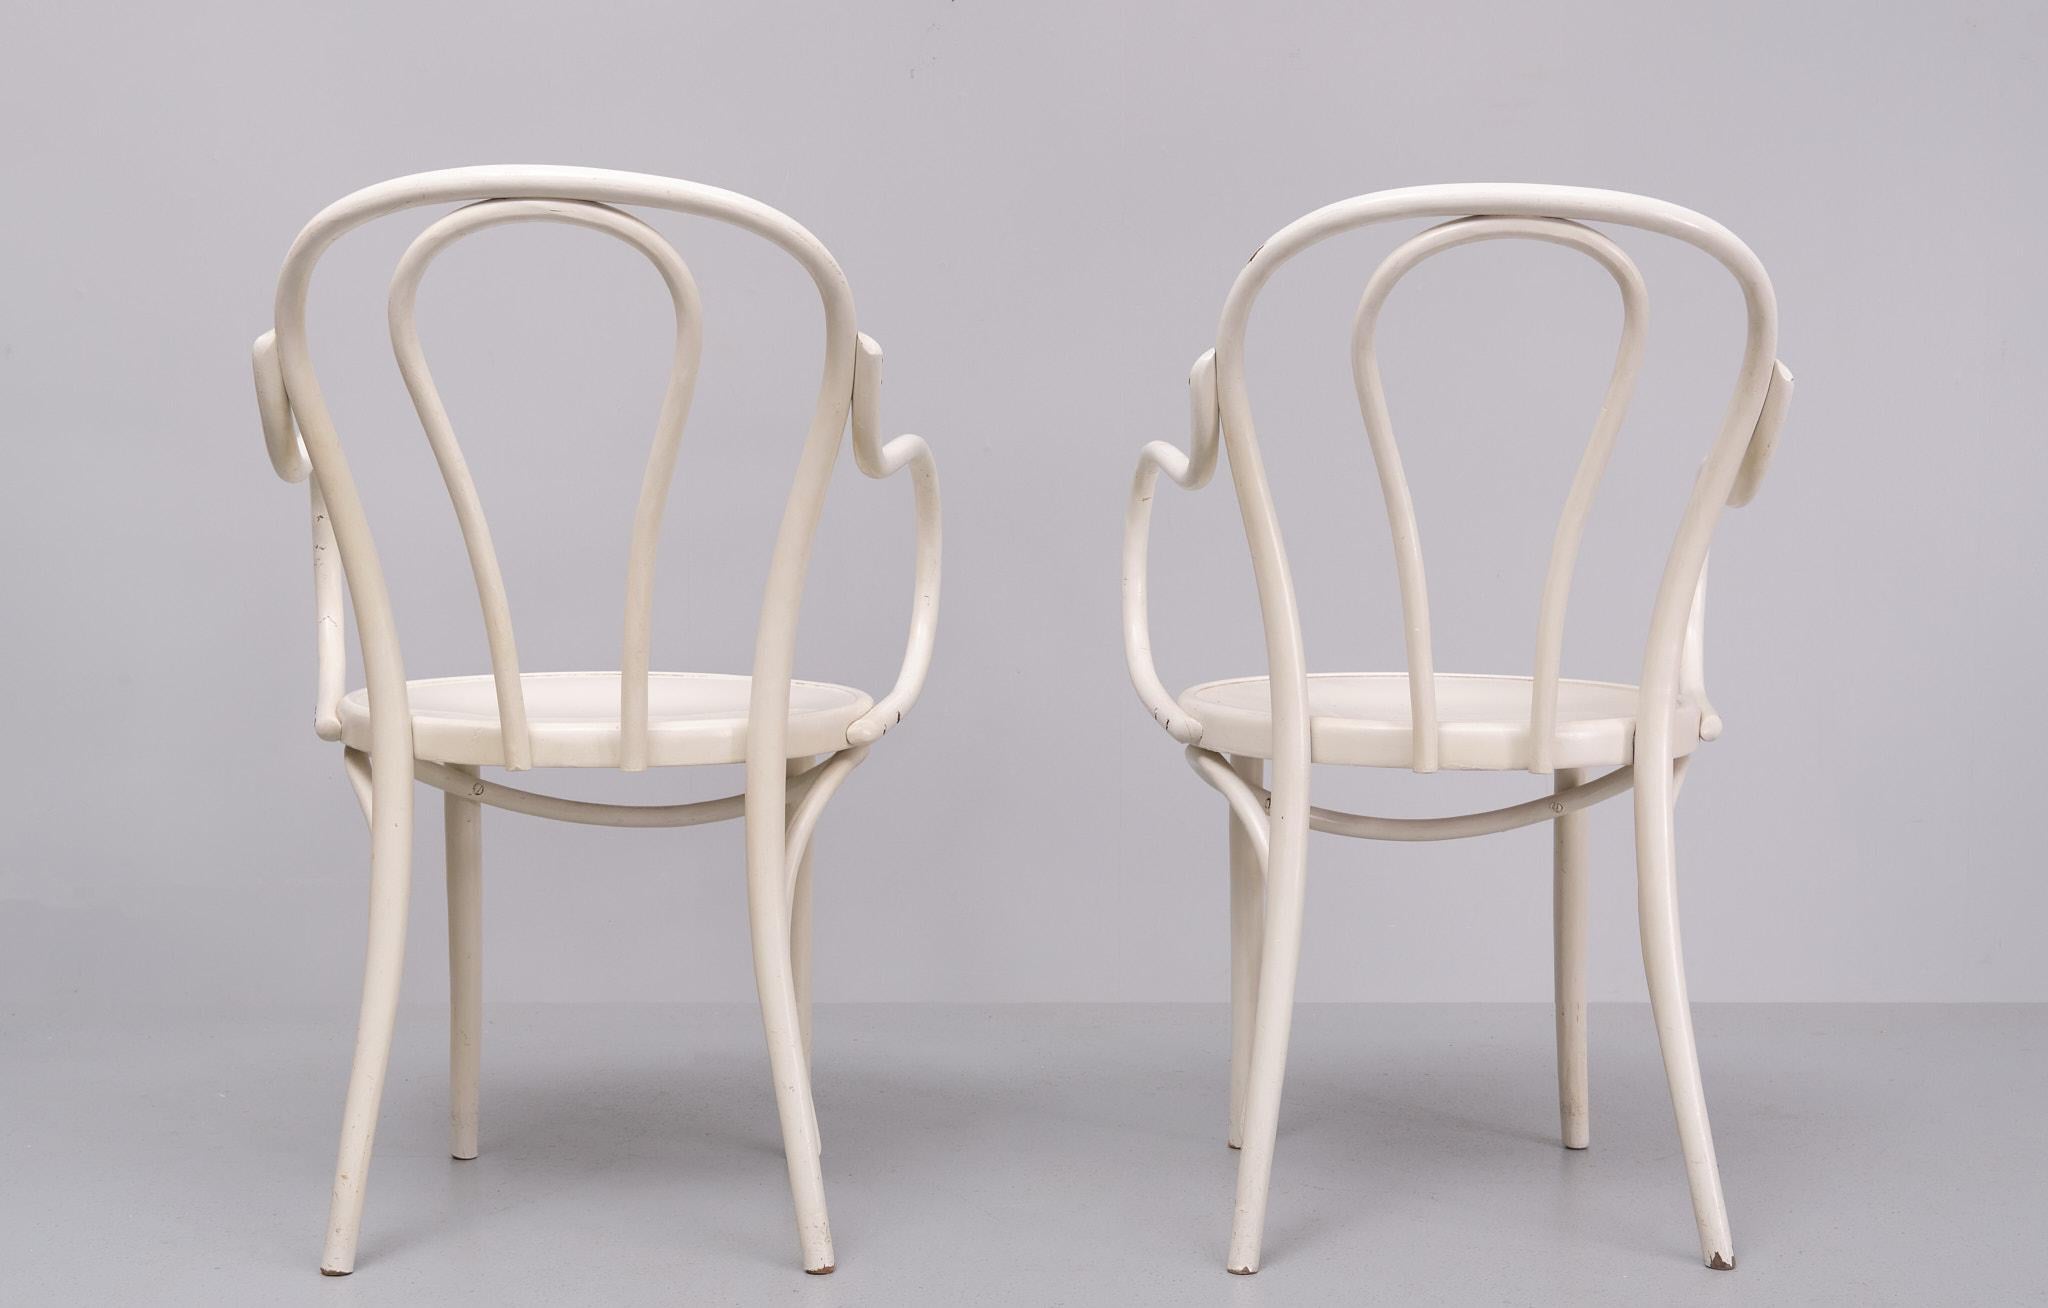 Vienna Secession Thonet  no 30  Armchairs  1950s   For Sale